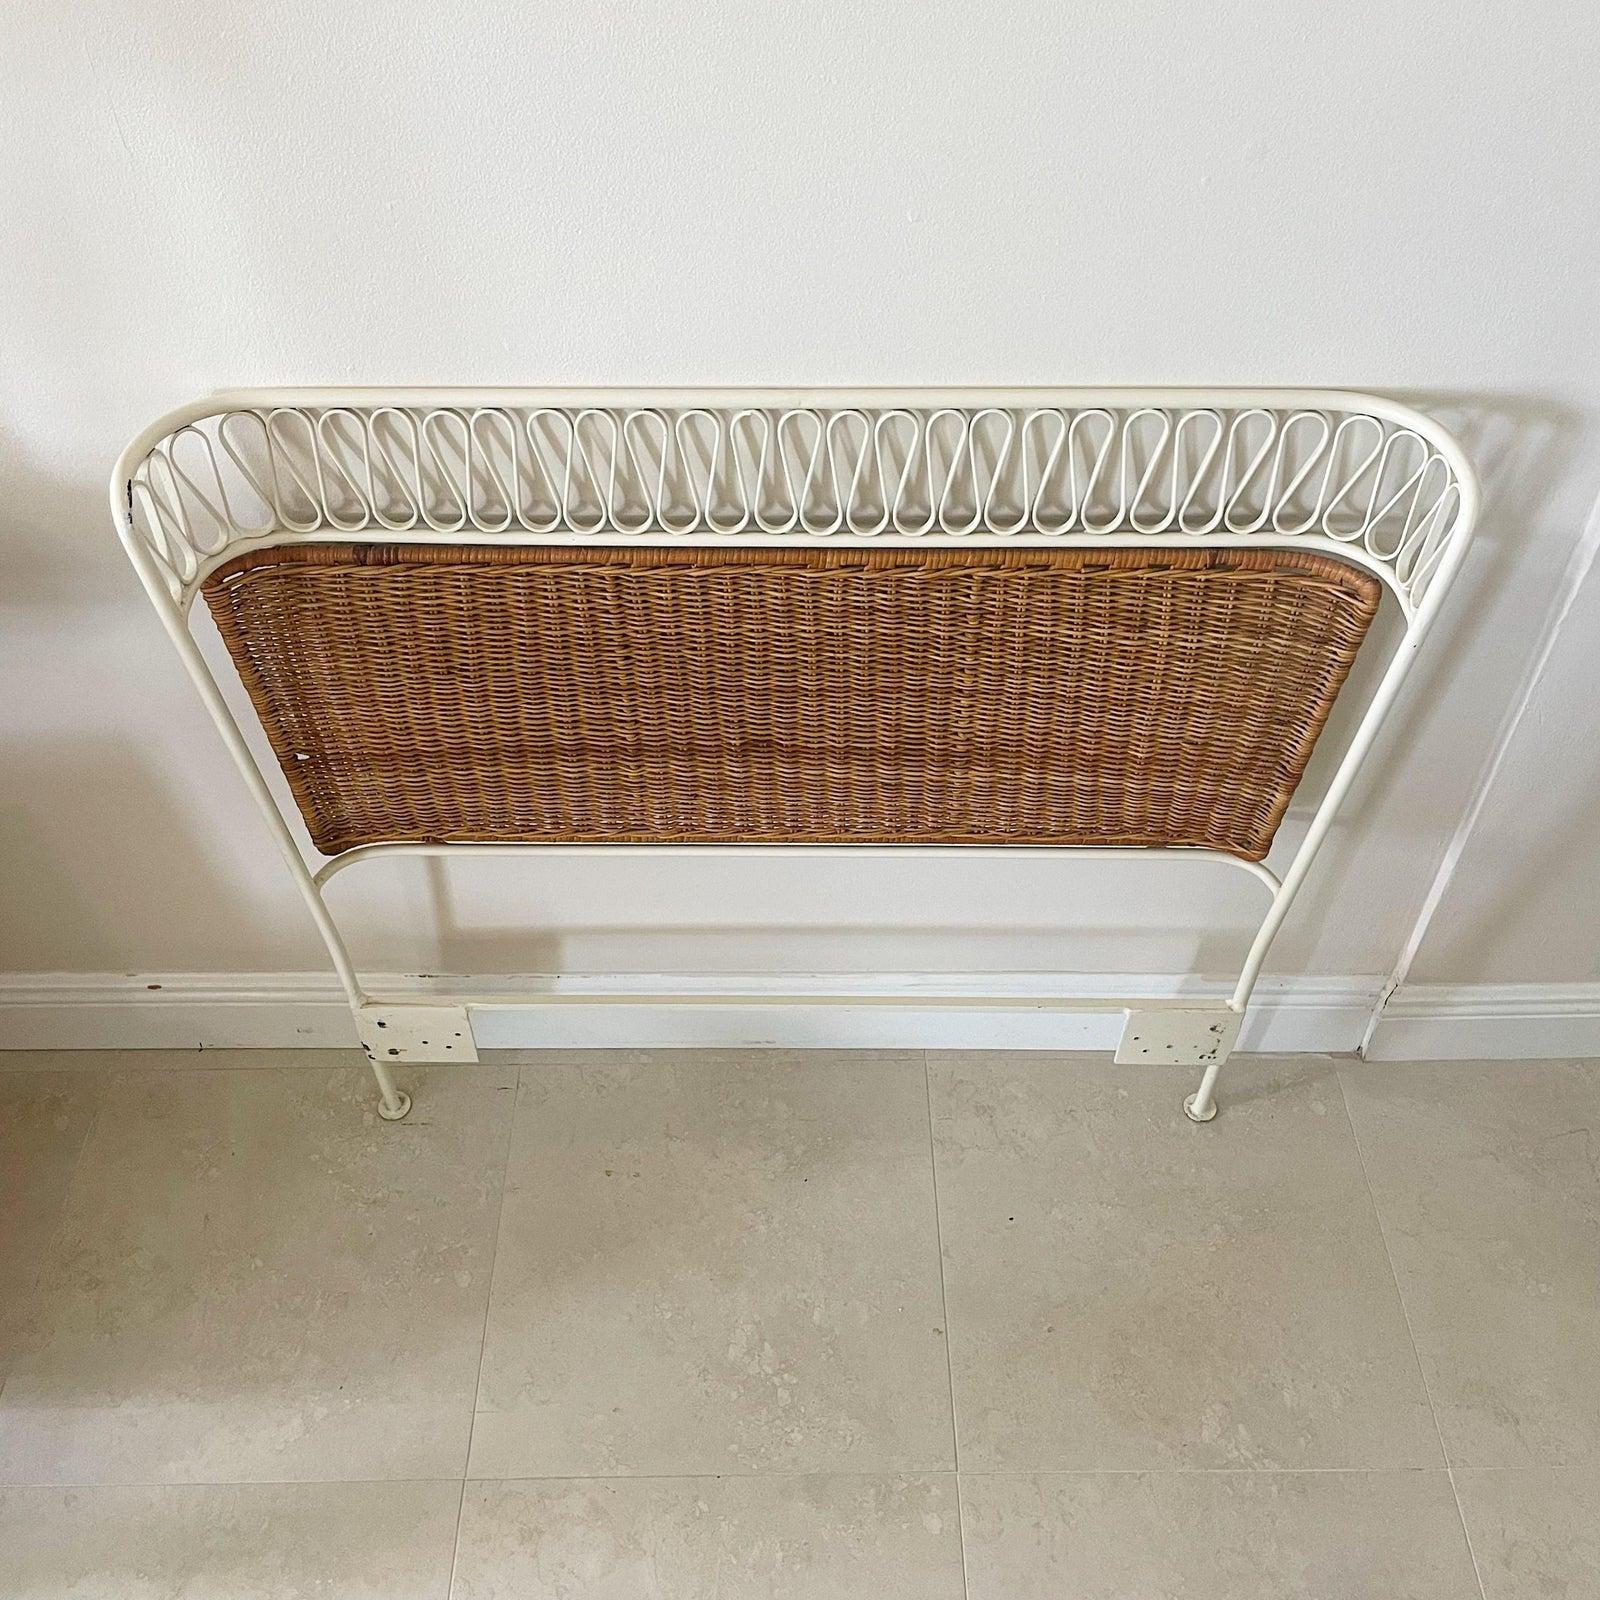 Caning Pair of Twin Headboards by John Salterini, Circa 1950, Made in Italy